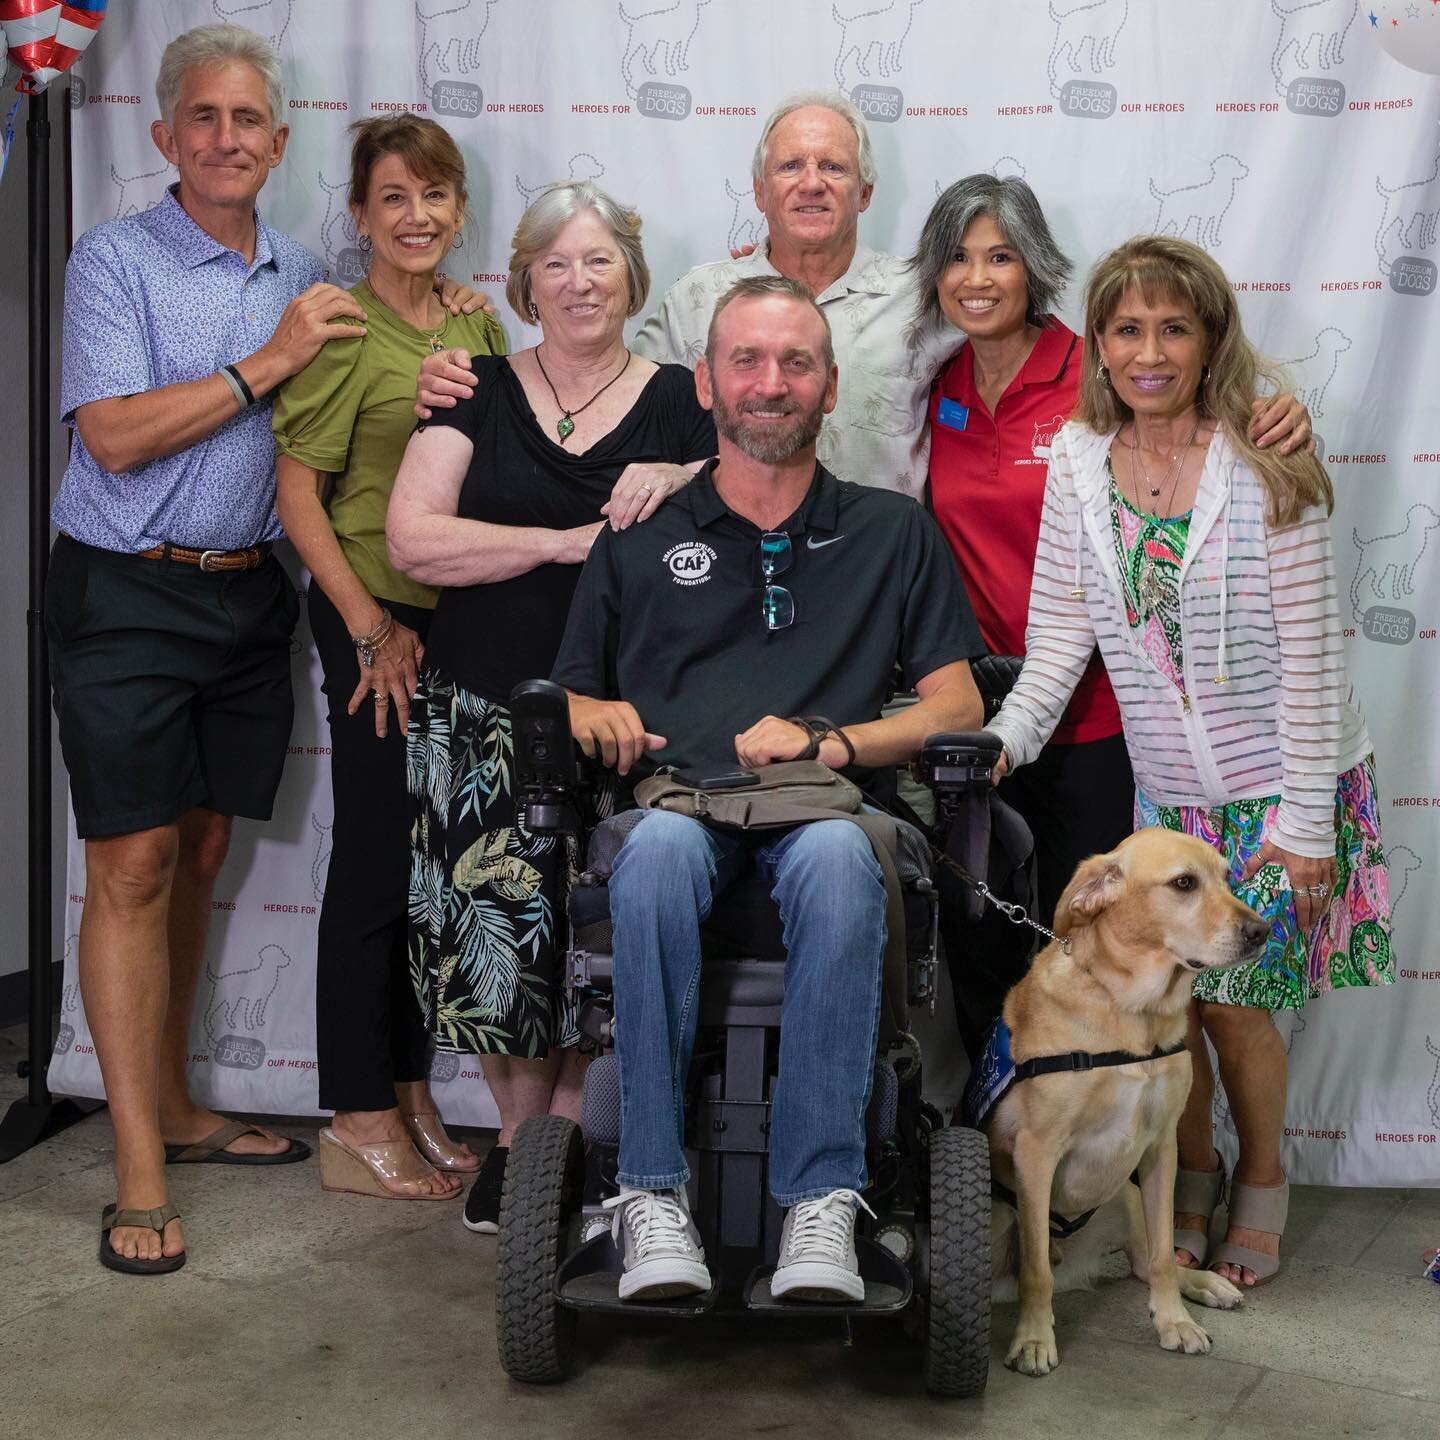 Freedom Dogs Open House 📸

Thank you to all of our amazing donors, trainers, veterans, friends and family that made this night so memorable! 🐕&zwj;🦺

Please click on the link in our bio to learn more about how our specialty - trained service dogs 